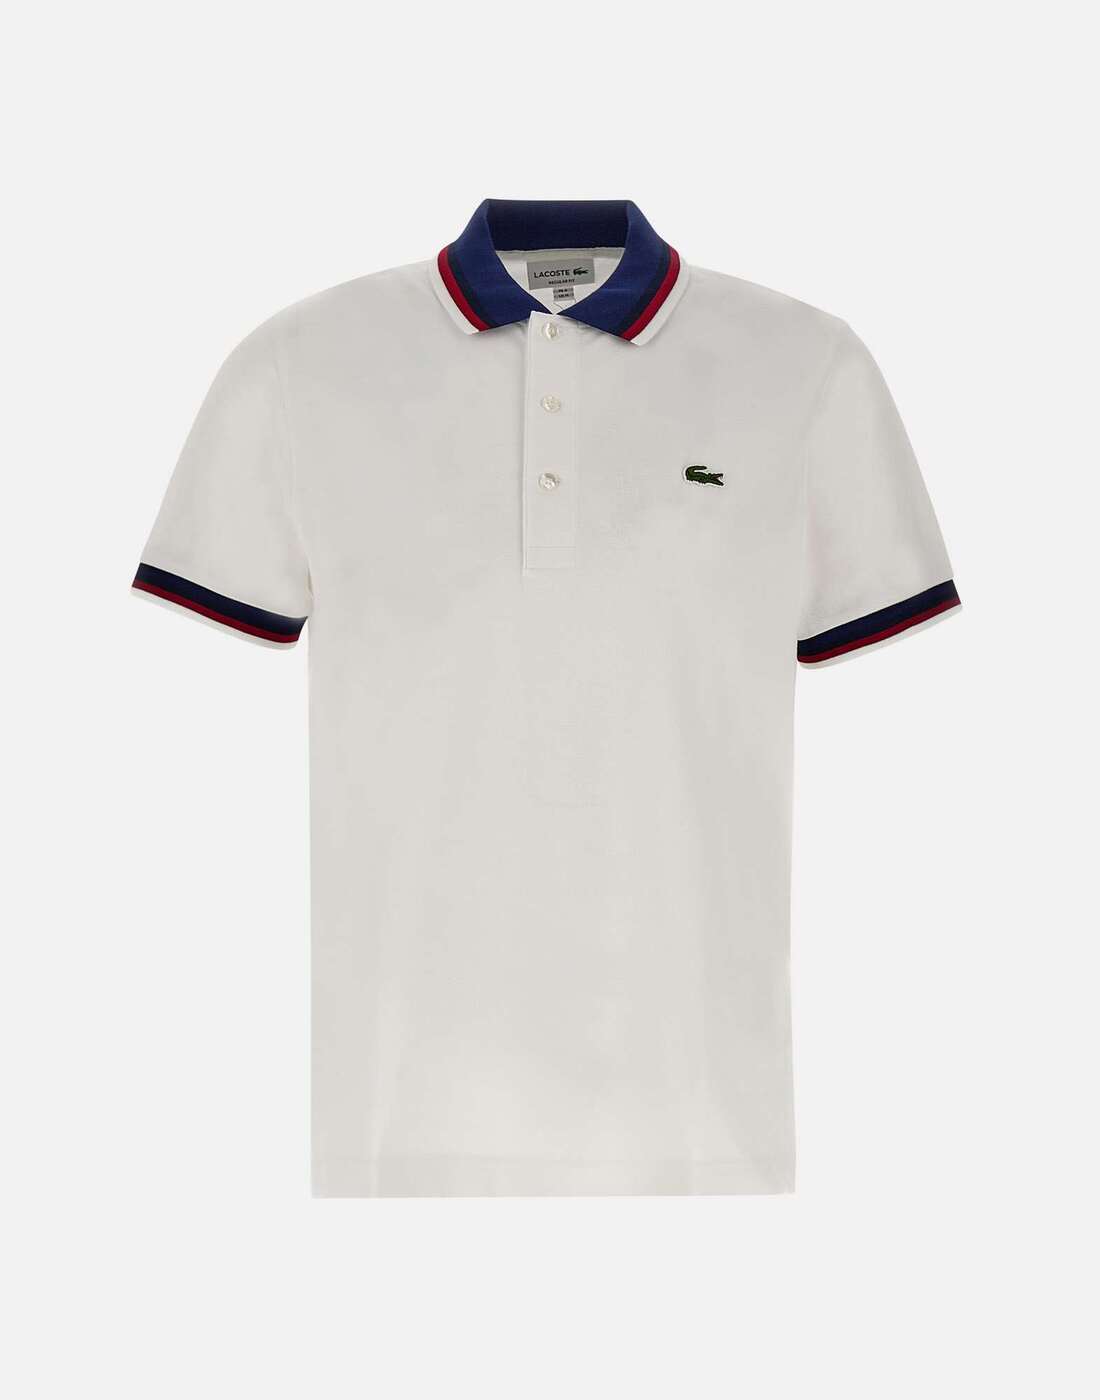 LACOSTE RXe zCg WHITE gbvX Y t2024 PH3461 001 y֐ŁEzybsOz ia